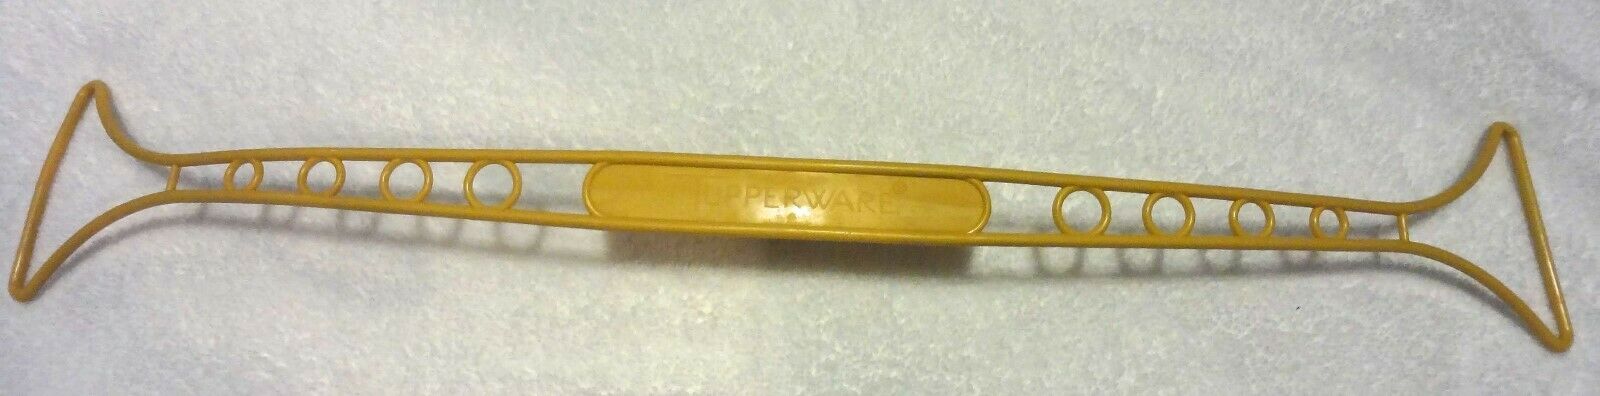 Vintage Tupperware Used Handle for Cake/Pie Taker Harvest Gold 624-13